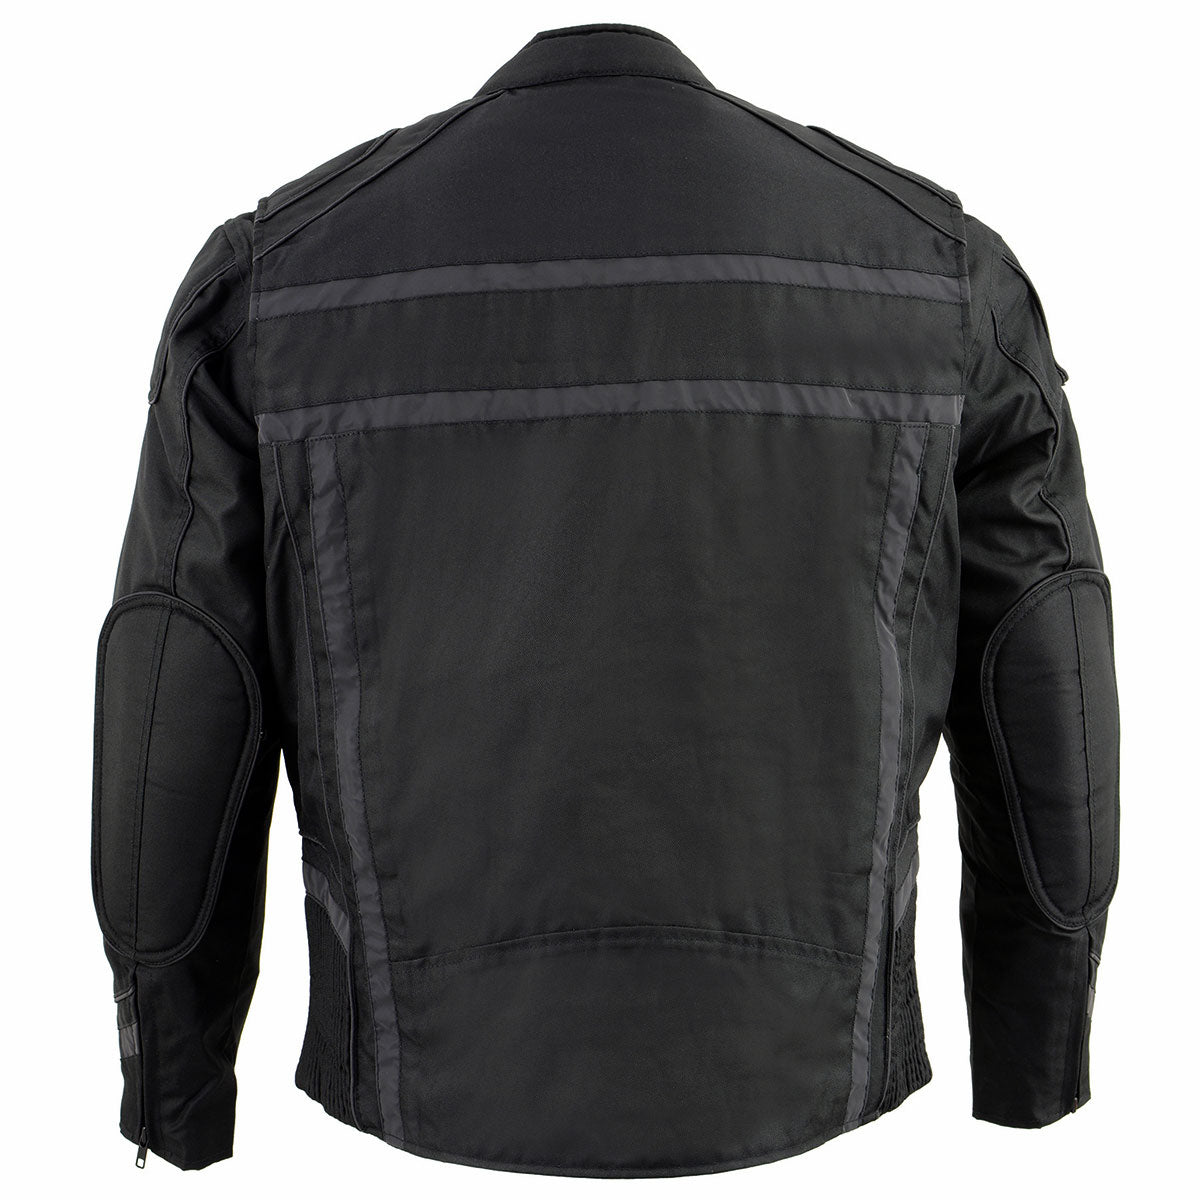 Milwaukee Leather MPM1740 Men's Black Vented Textile Jacket with Reflective Stripes